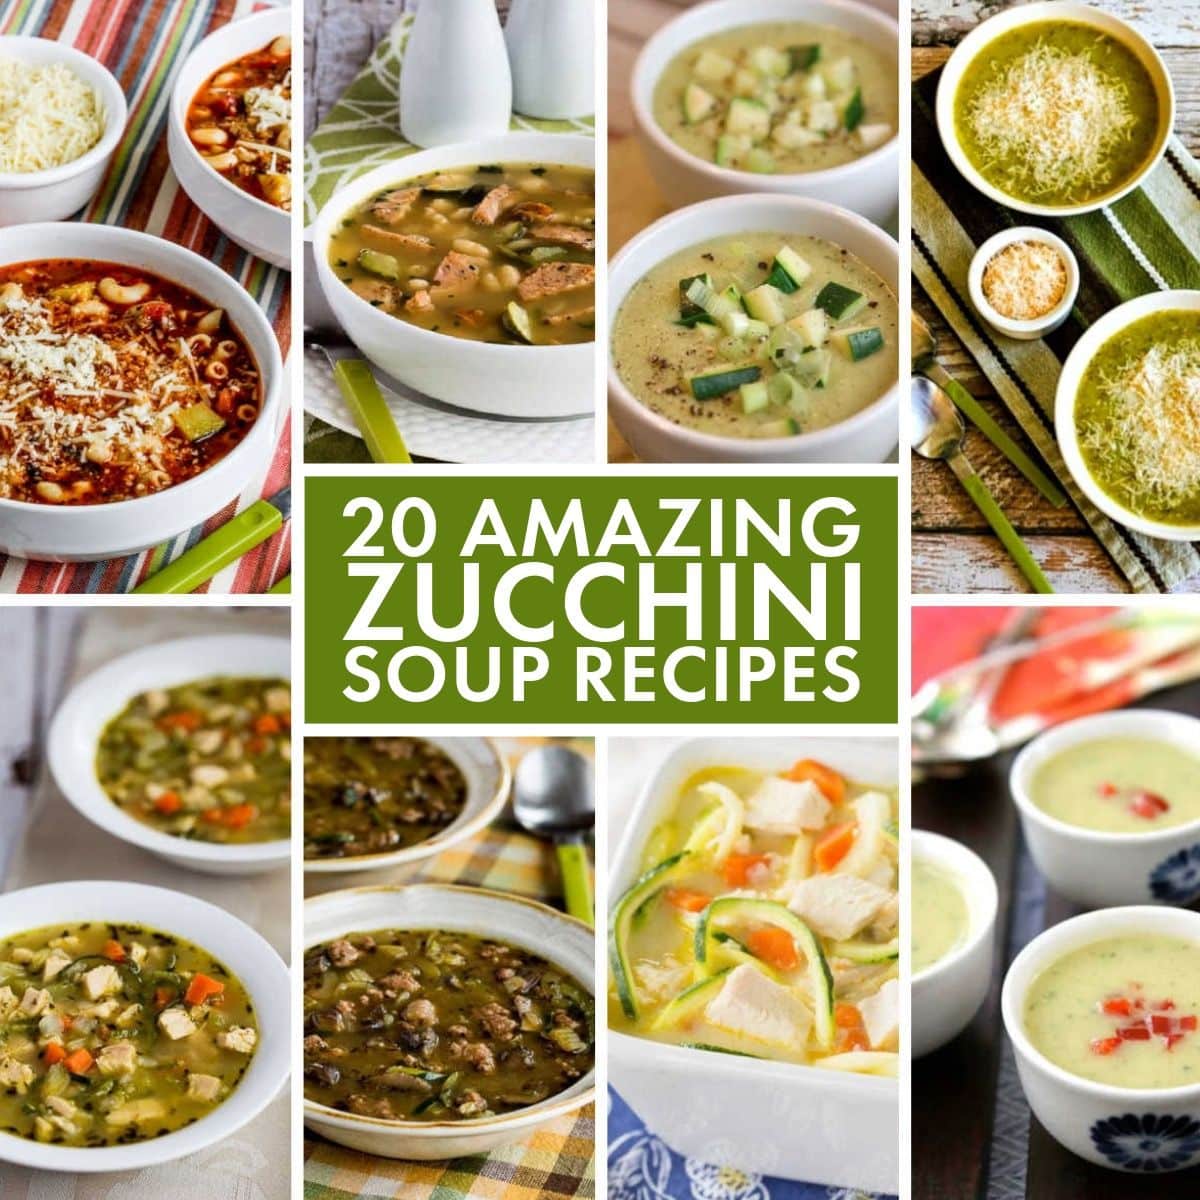 20 Amazing Zucchini Soup Recipes text overlay collage with featured recipes.